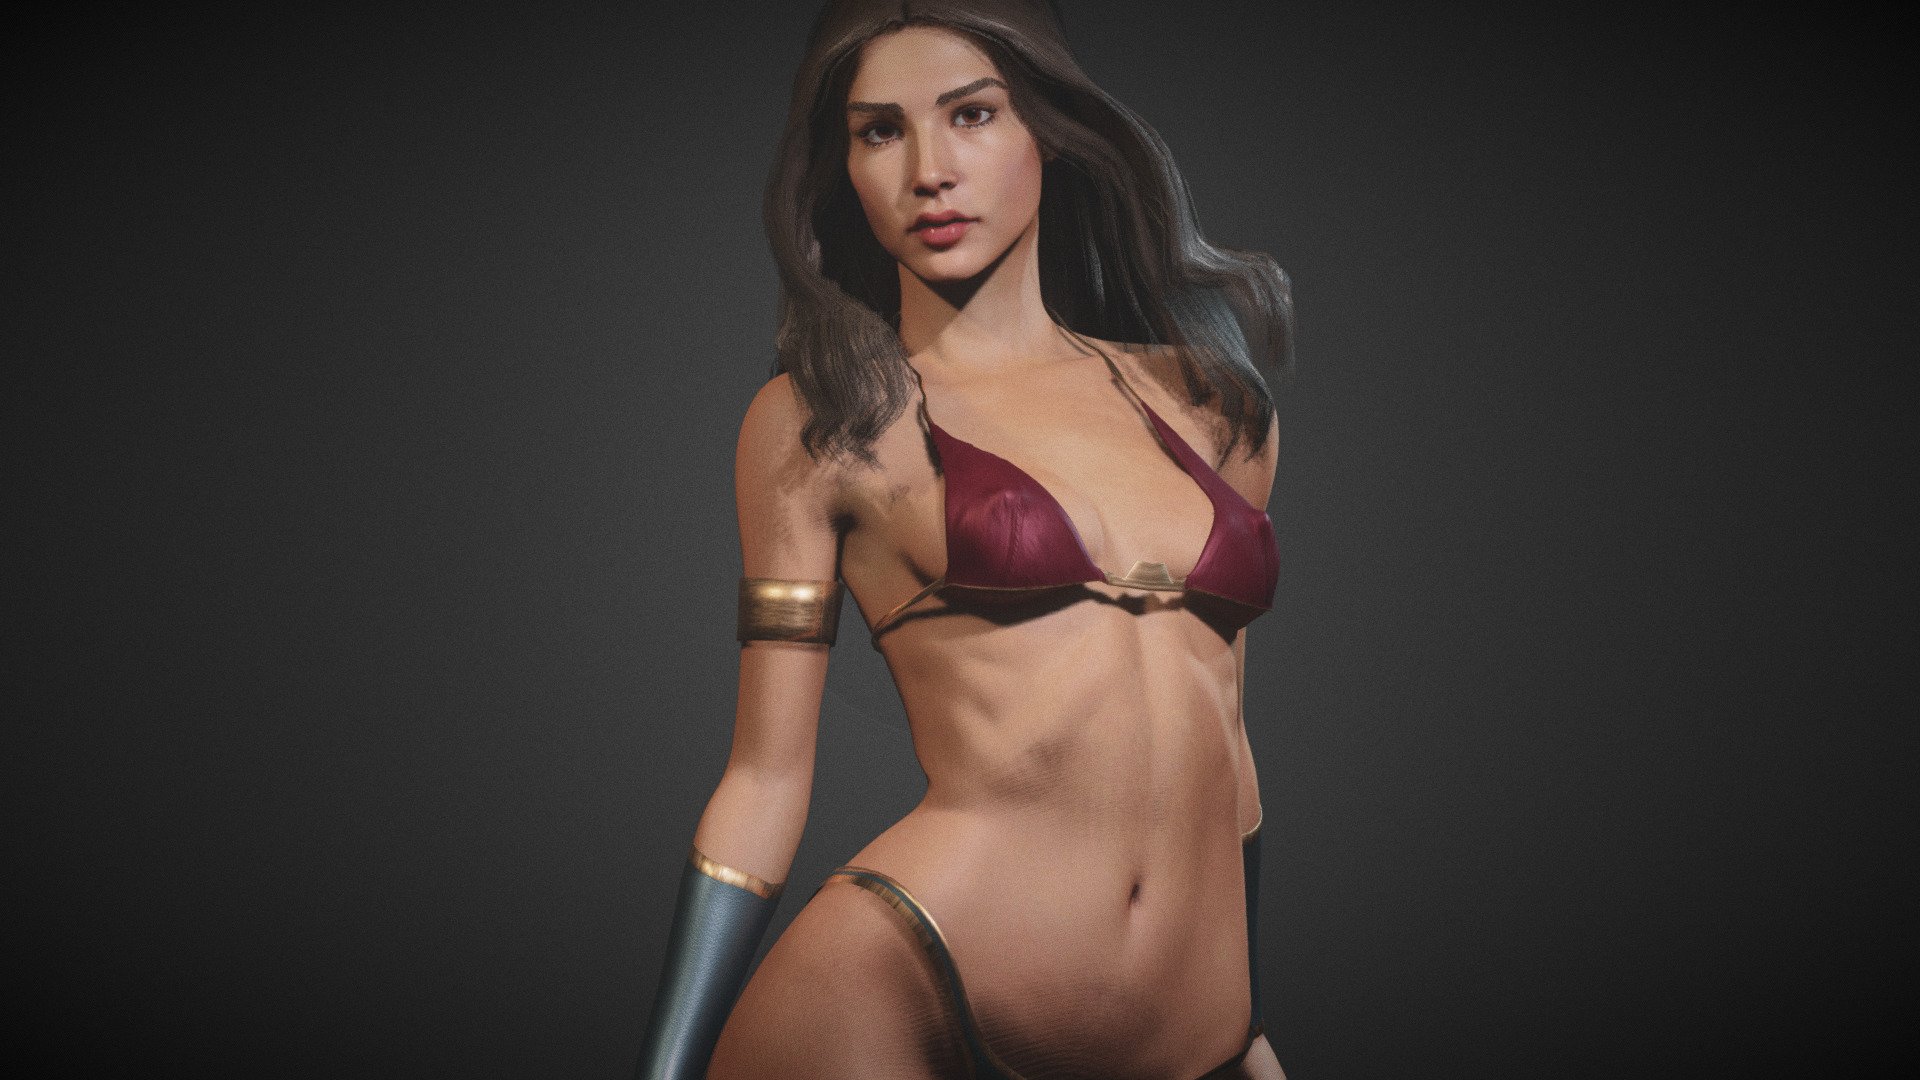 * PLEASE DOWNLOAD THE RAR INSIDE THE ADDITIONAL FILES!!!
Wonder Bikini Female Girl 3D model. Basic animation loop.  Model in Blender file. Body Fully rigged, face basic rig. SSS subsurface scattering. mixamo bone names for animation. Blend file format. (you can export to any format from blender) 3d model